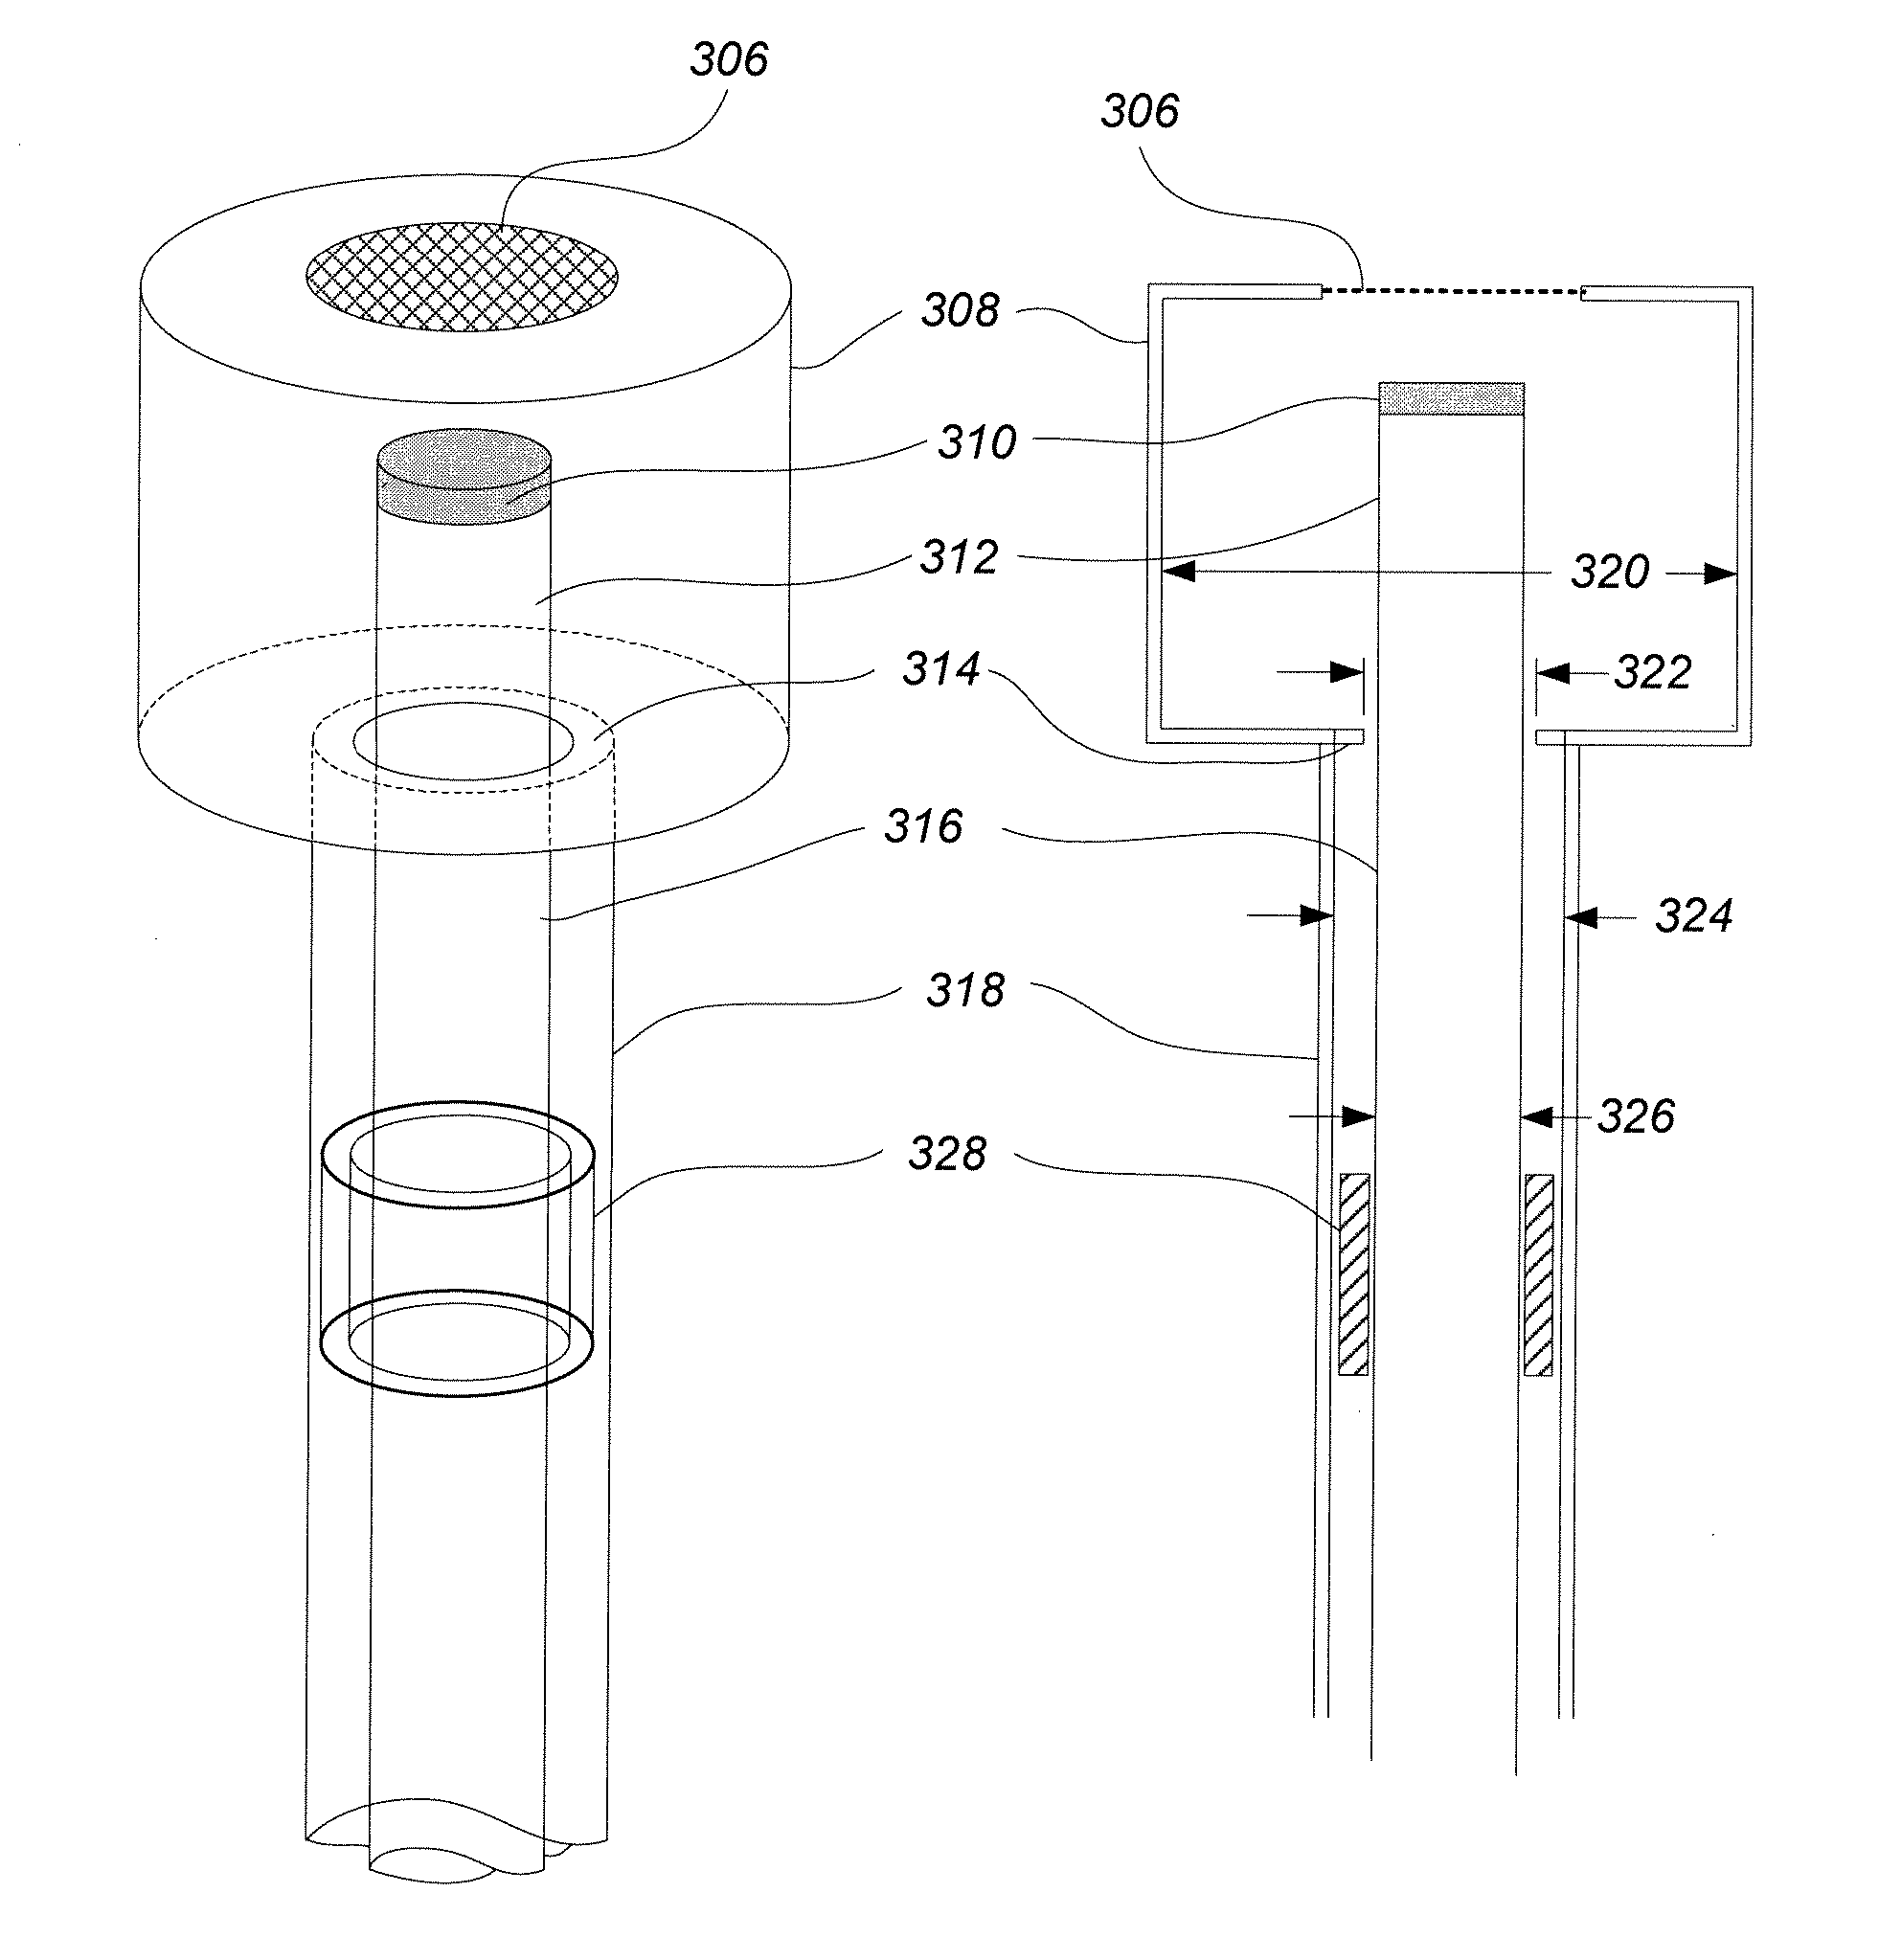 Method and apparatus for RF input coupling for inductive output tubes and other emission gated devices